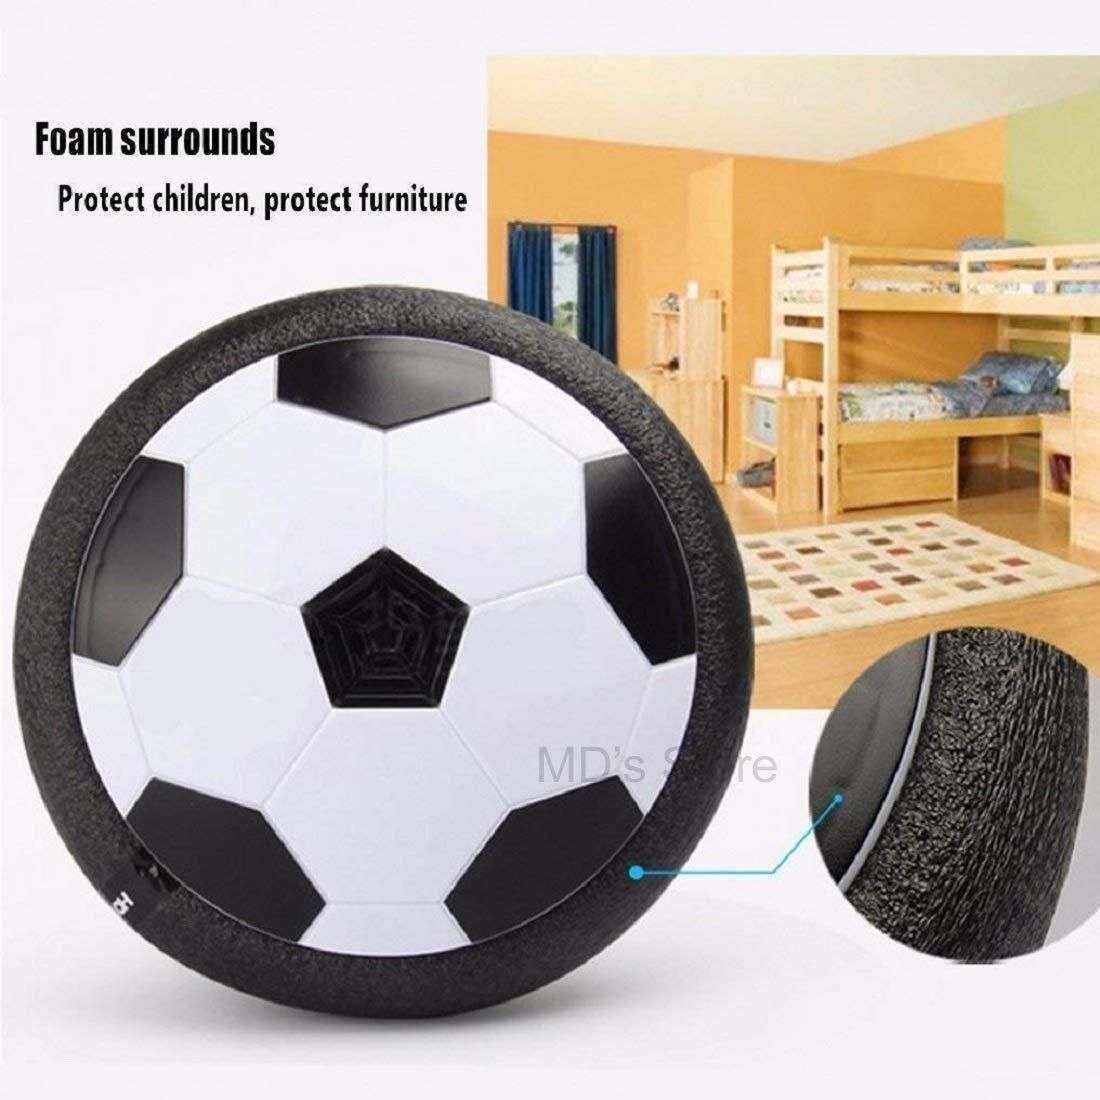 Magic Air Soccer Ball for Toddlers with Flashing Colored LED Lights